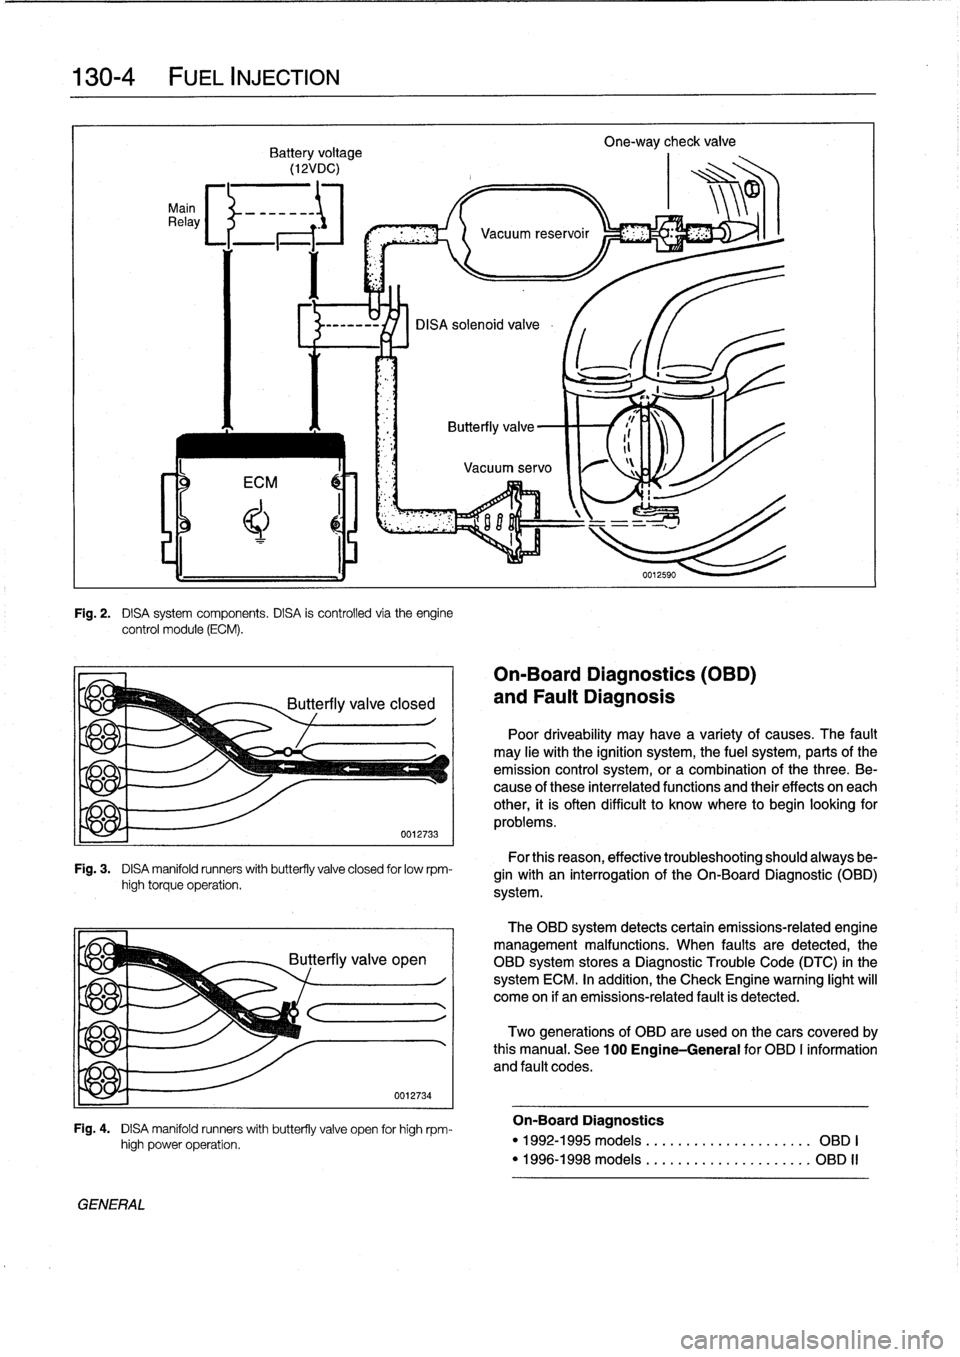 BMW 318i 1996 E36 Workshop Manual 
130-
4

	

FUEL
INJECTION

Main
Relay

Fig
.
2
.

	

DISA
system
components
.
DISA
is
controlled
via
theengine
control
module
(ECM)
.

Fig
.
3
.

	

DISA
manifold
runners
with
butterfly
valve
closed
